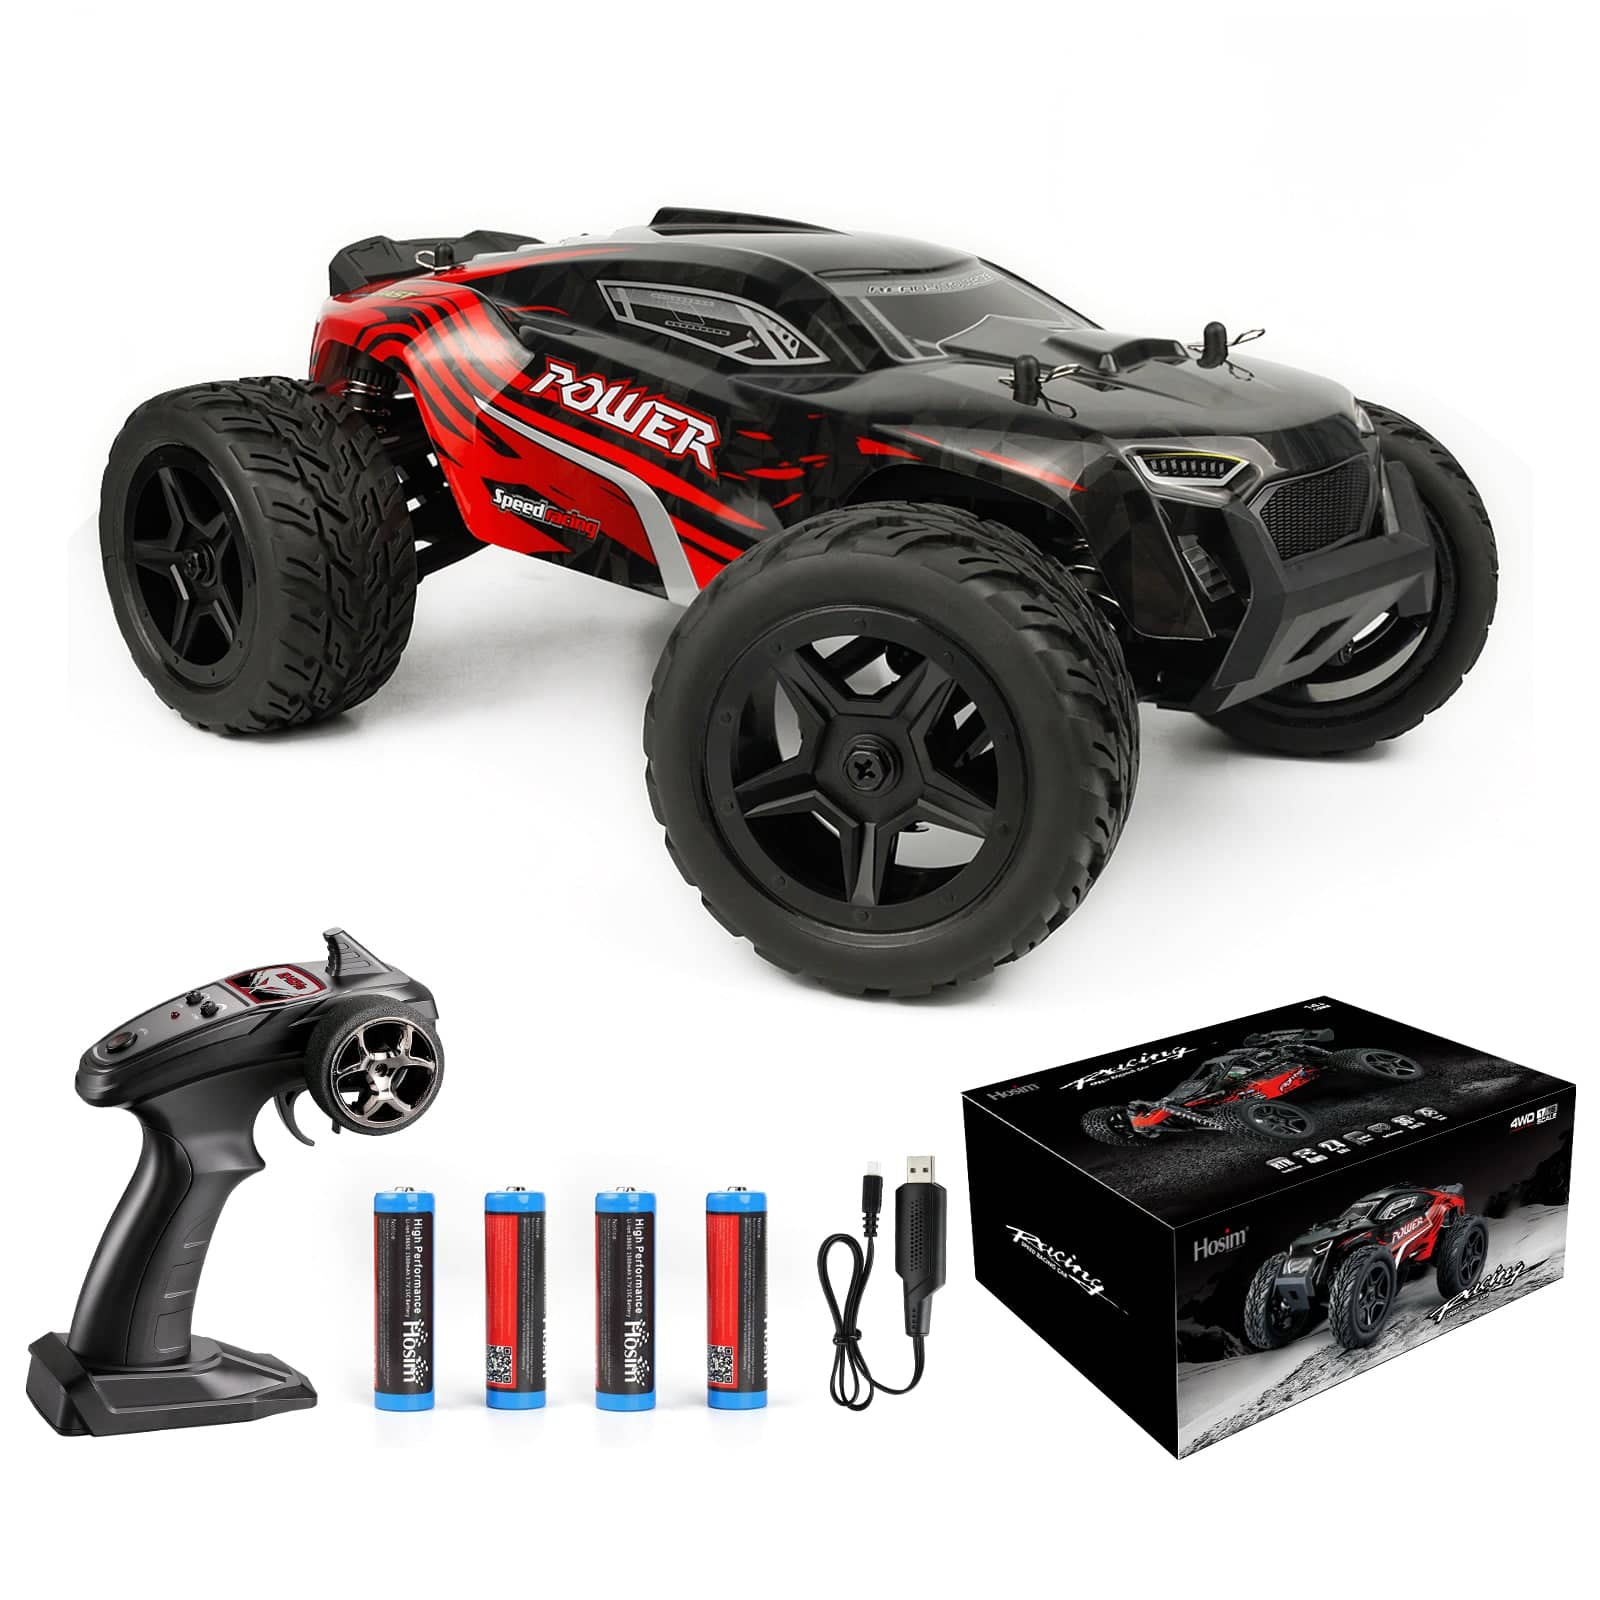 Hosim 1:14 4WD 36km/h Radio Controlled Monster Truck Buggy G172 Red